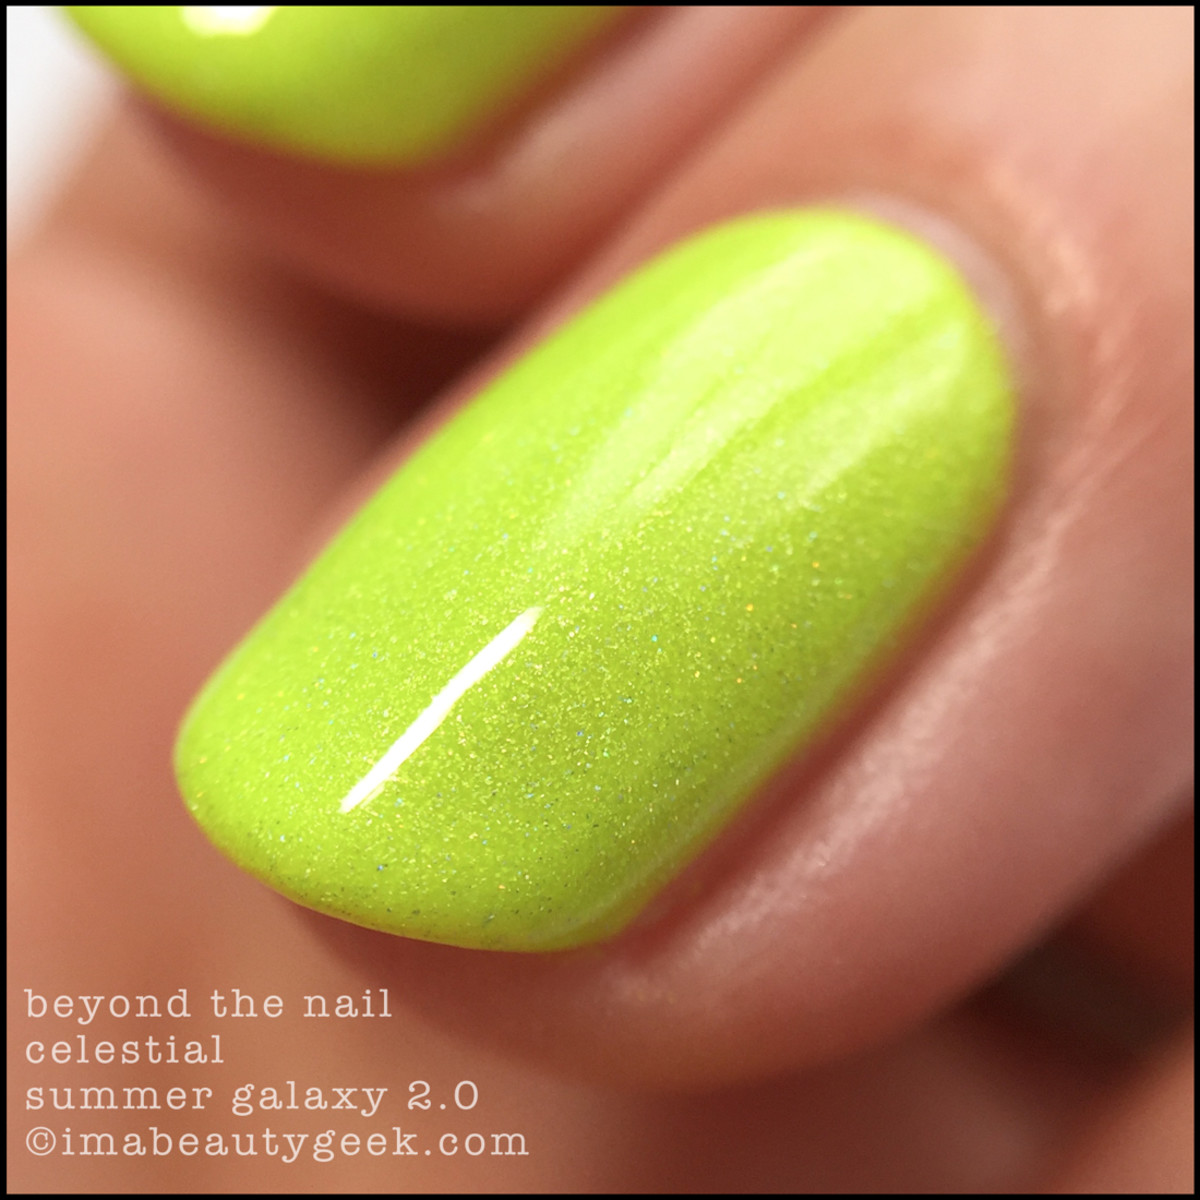 Beyond the Nail Celestial Macro - Summer Galaxy 2.0 Collection Swatches